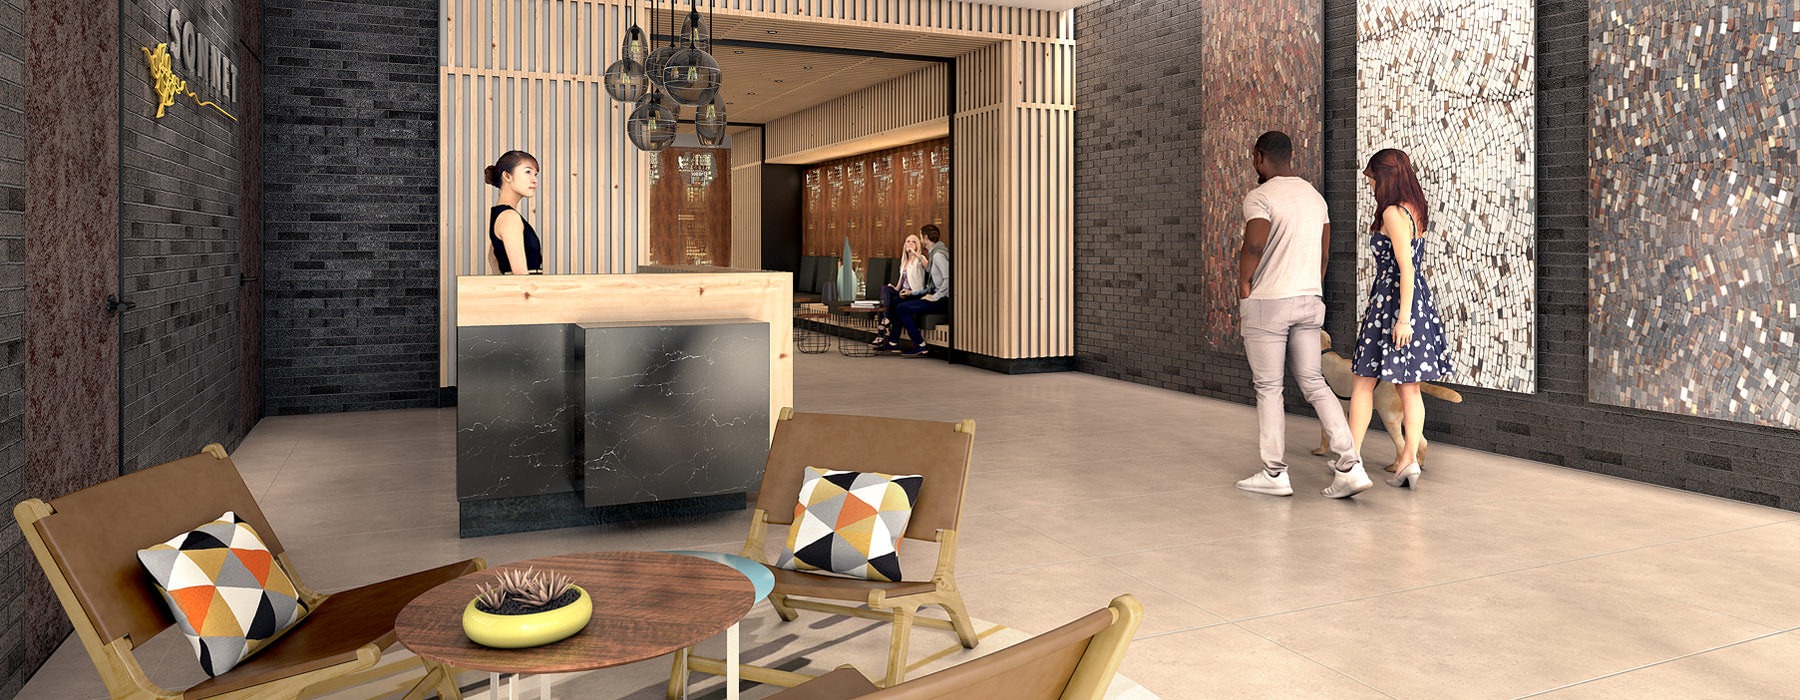 Lobby at Sonnet Apartments